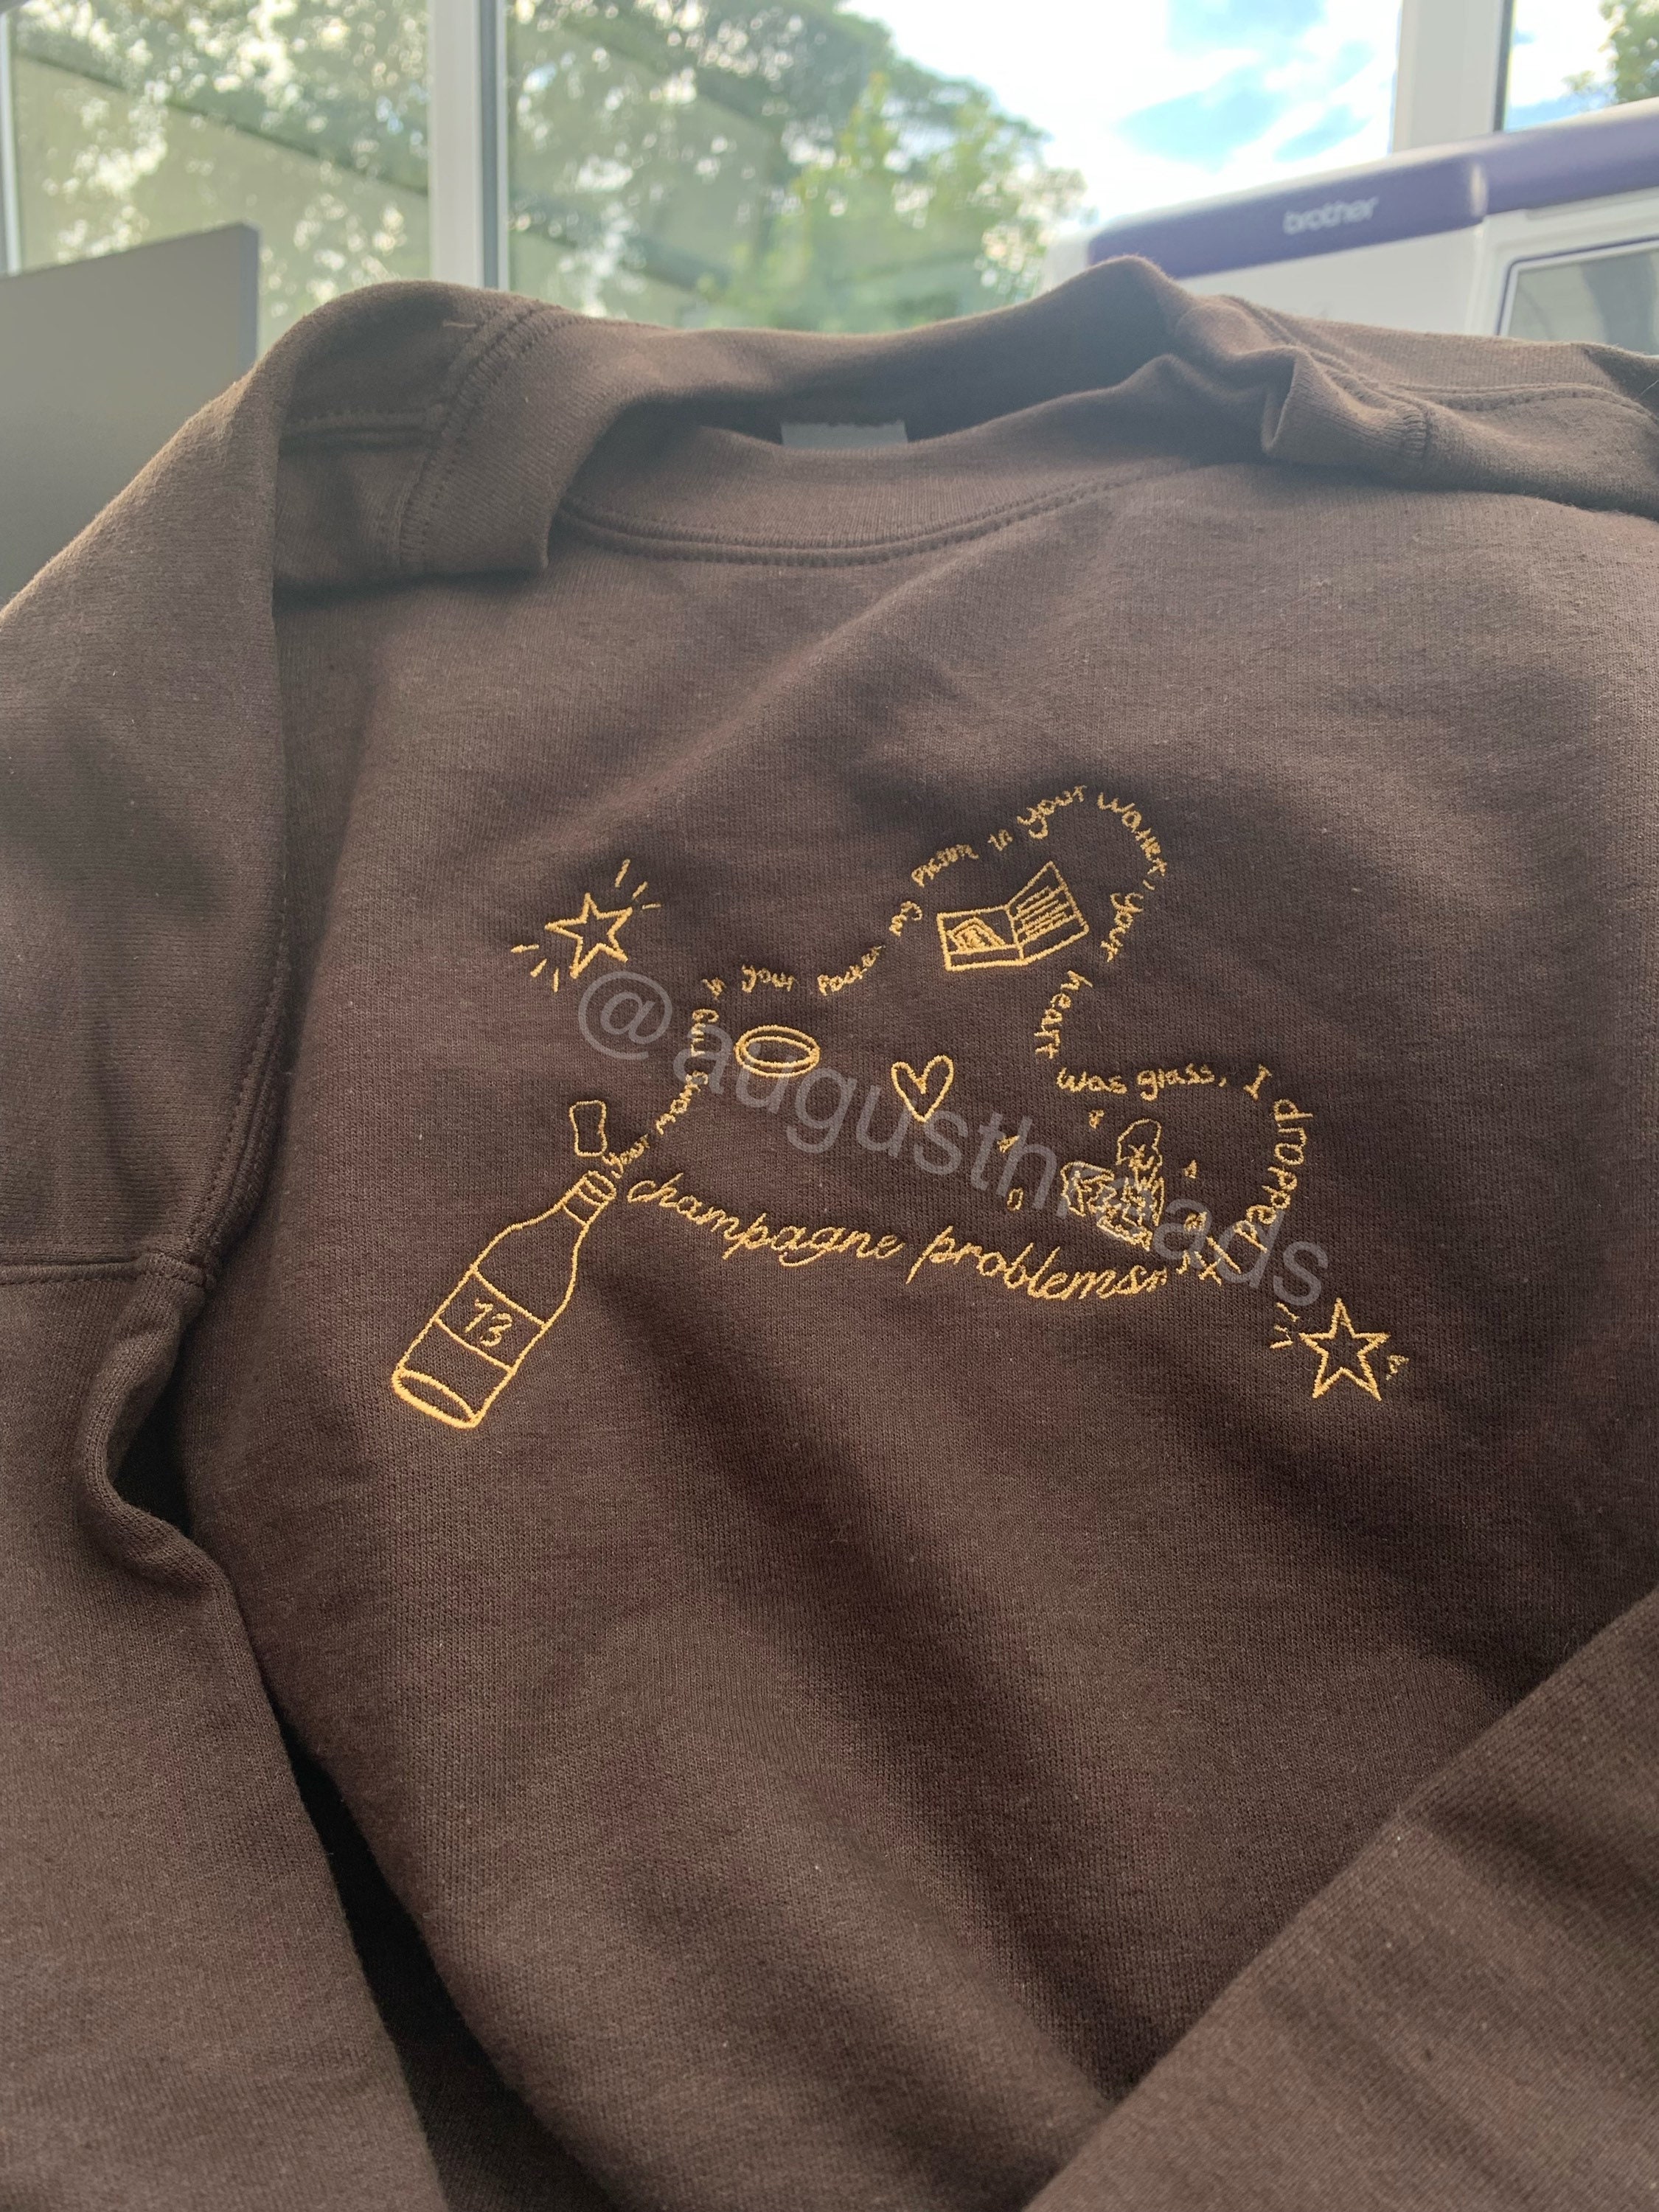 Taylor Swift Champagne Problems Embroidered Sweatshirt / - Etsy UK